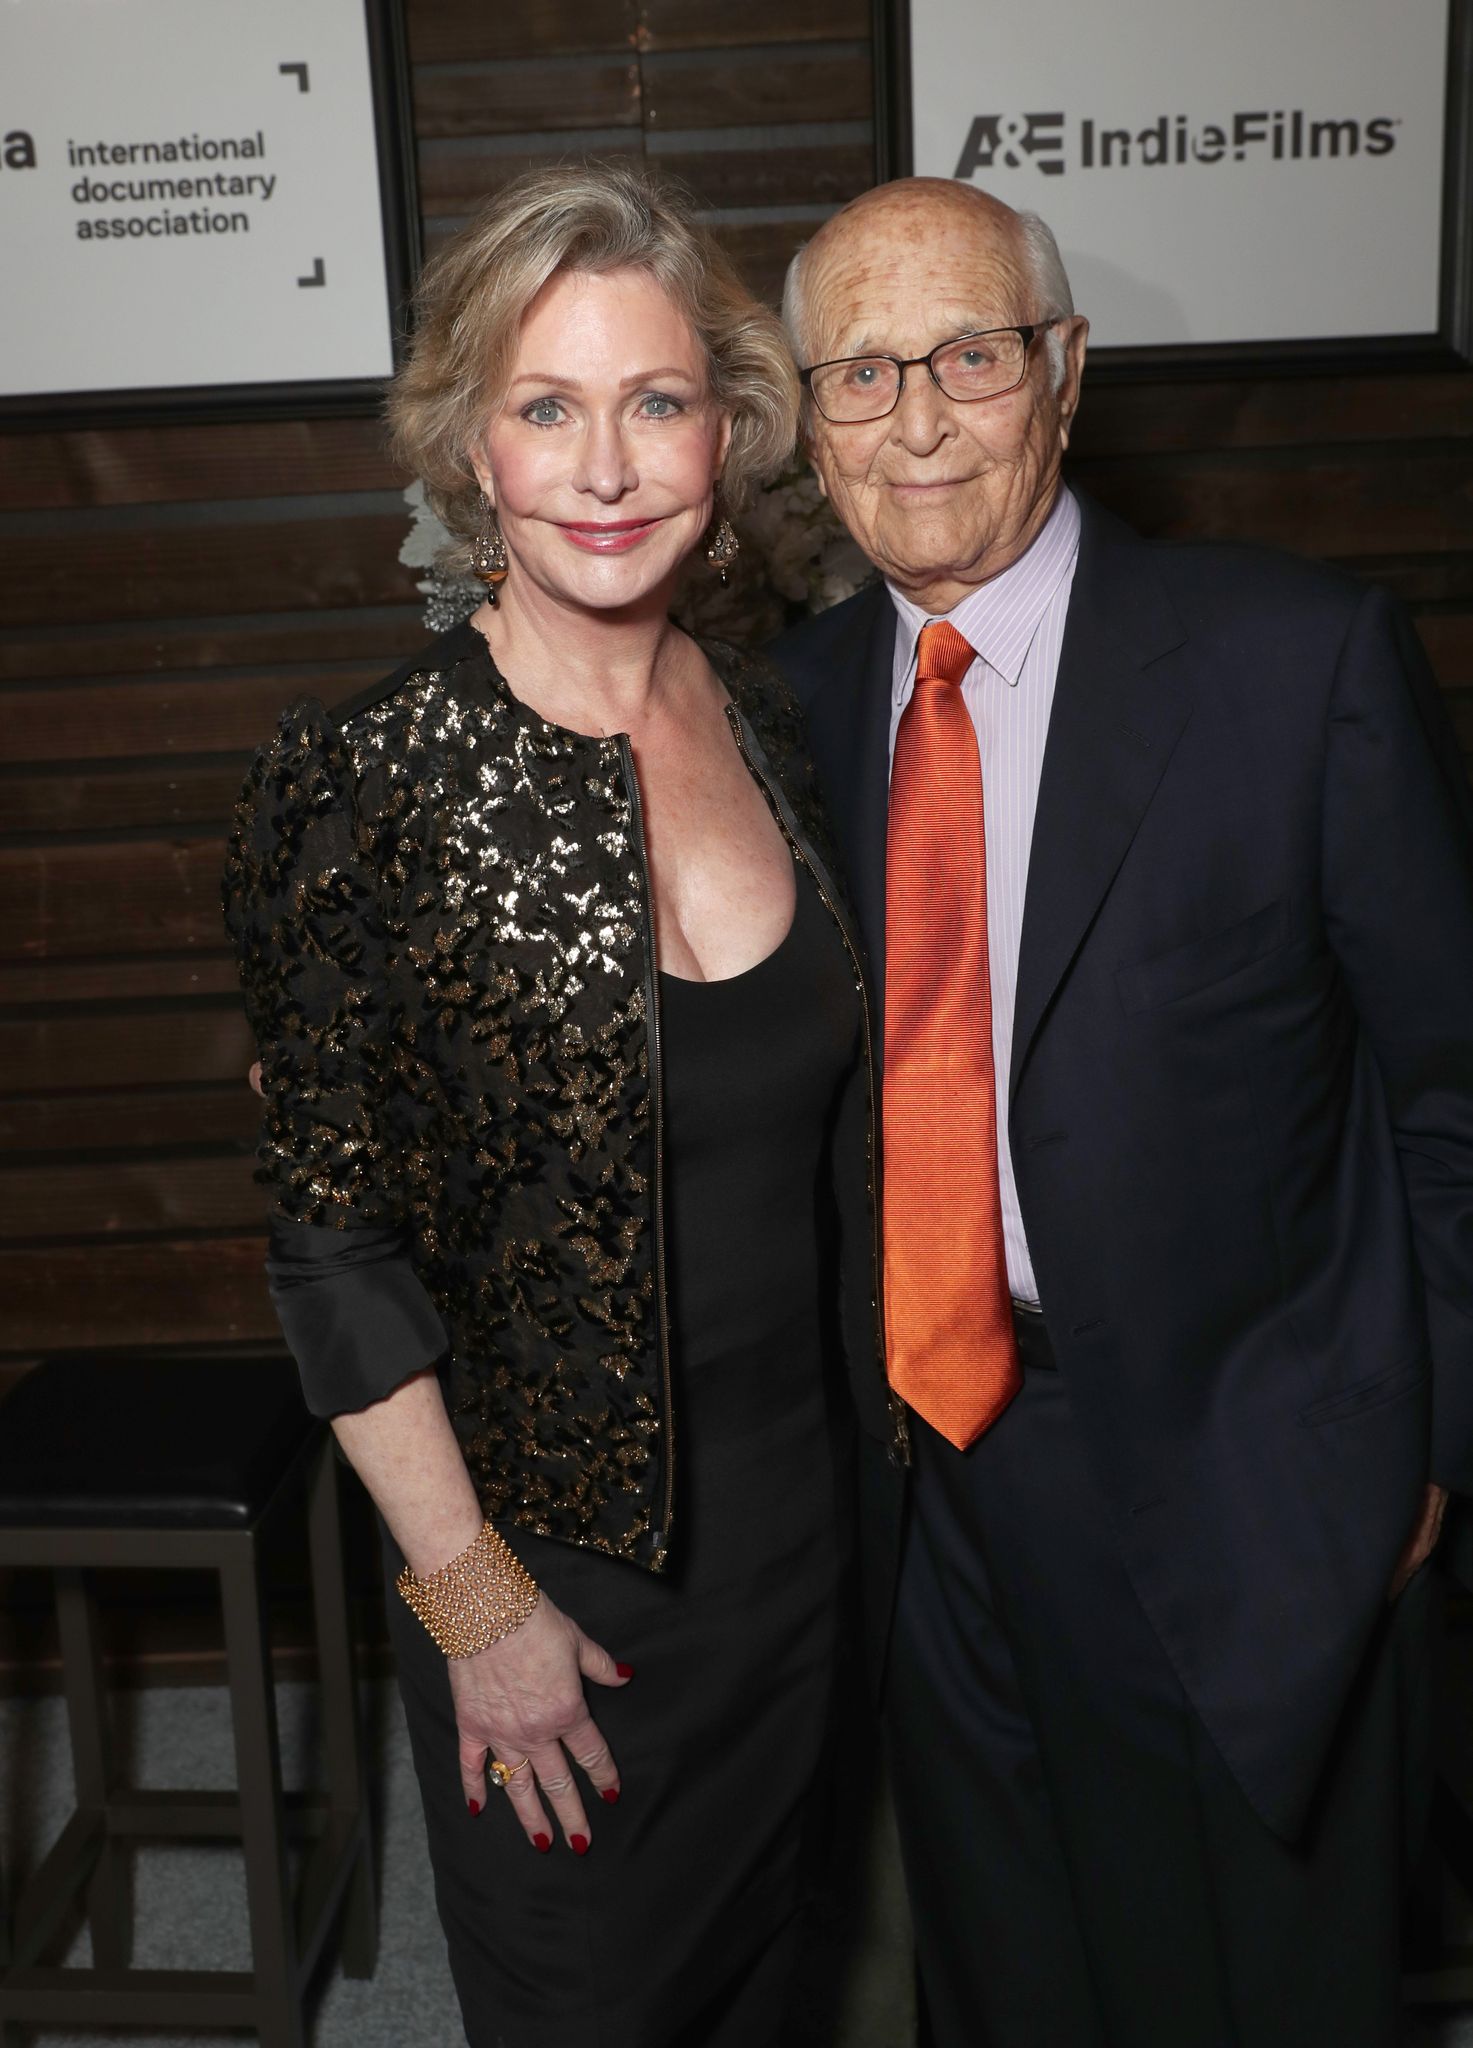 Lyn and Norman Lear at the 32nd Annual IDA Documentary Awards in 2016 in Hollywood, California | Source: Getty Images